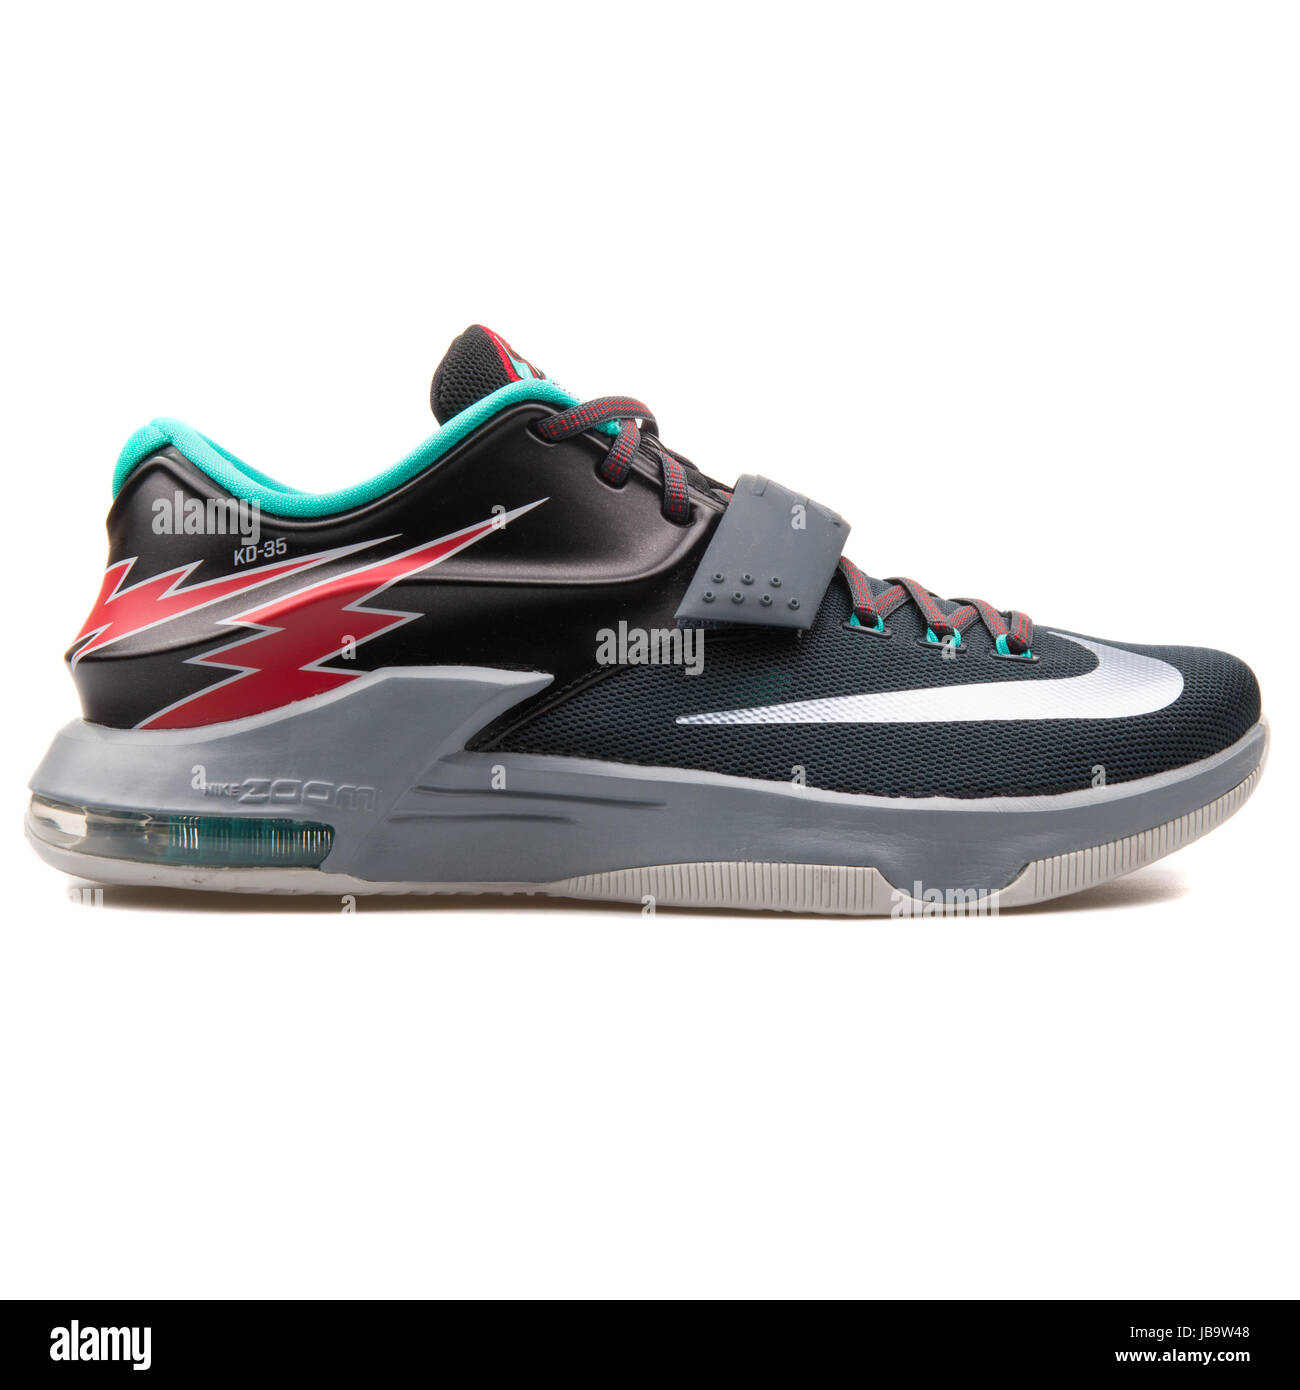 Nike KD VII Black, Grey, Green and Red Men's Basketball Shoes - 653996-005  Stock Photo - Alamy